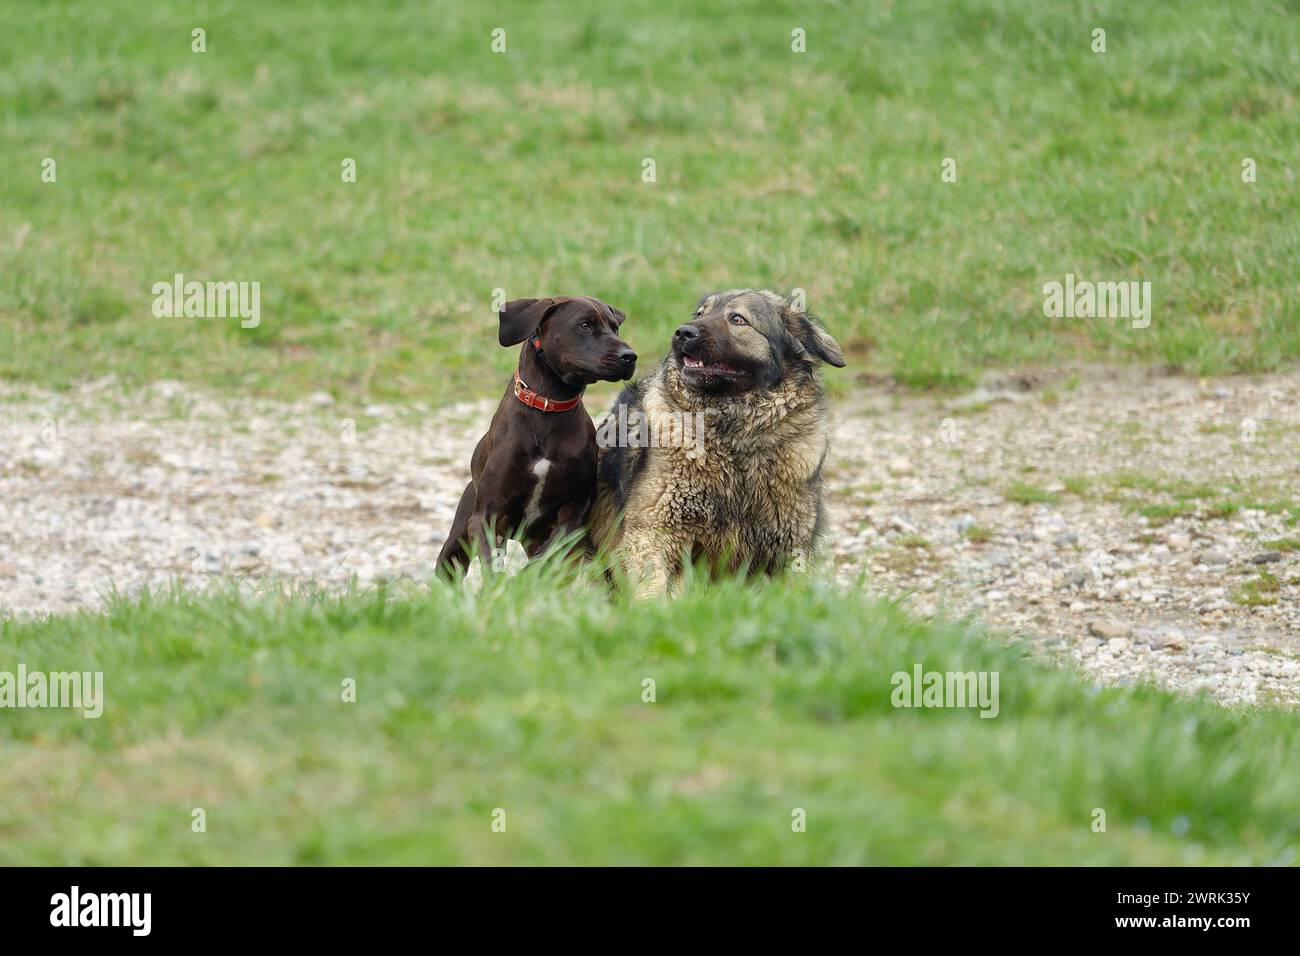 A Blue Lacy and Shar dogs frolicking in a field Stock Photo